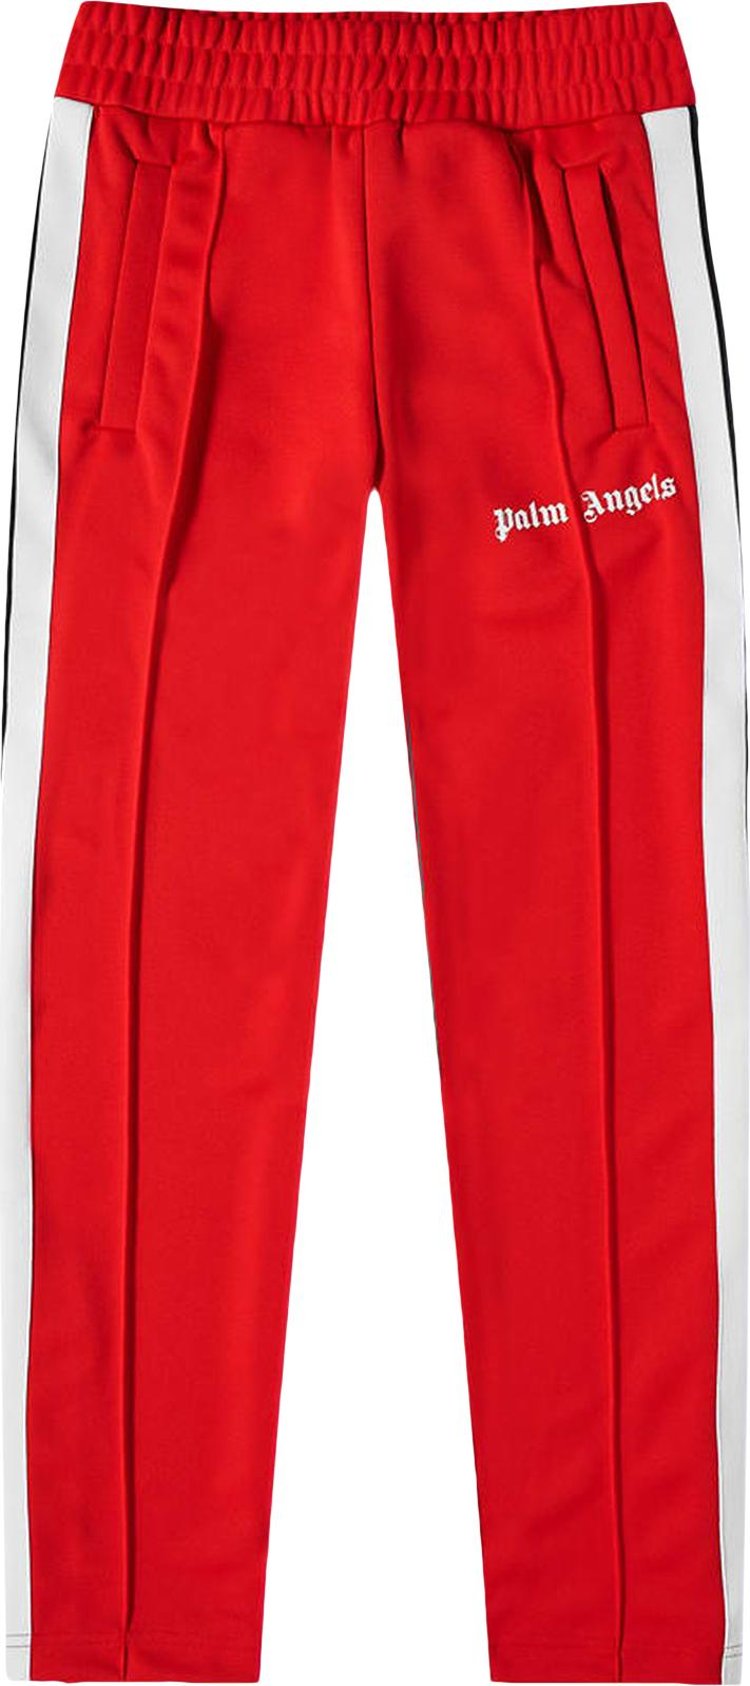 Palm Angels Terry Monogram Track Pants Red/Off White